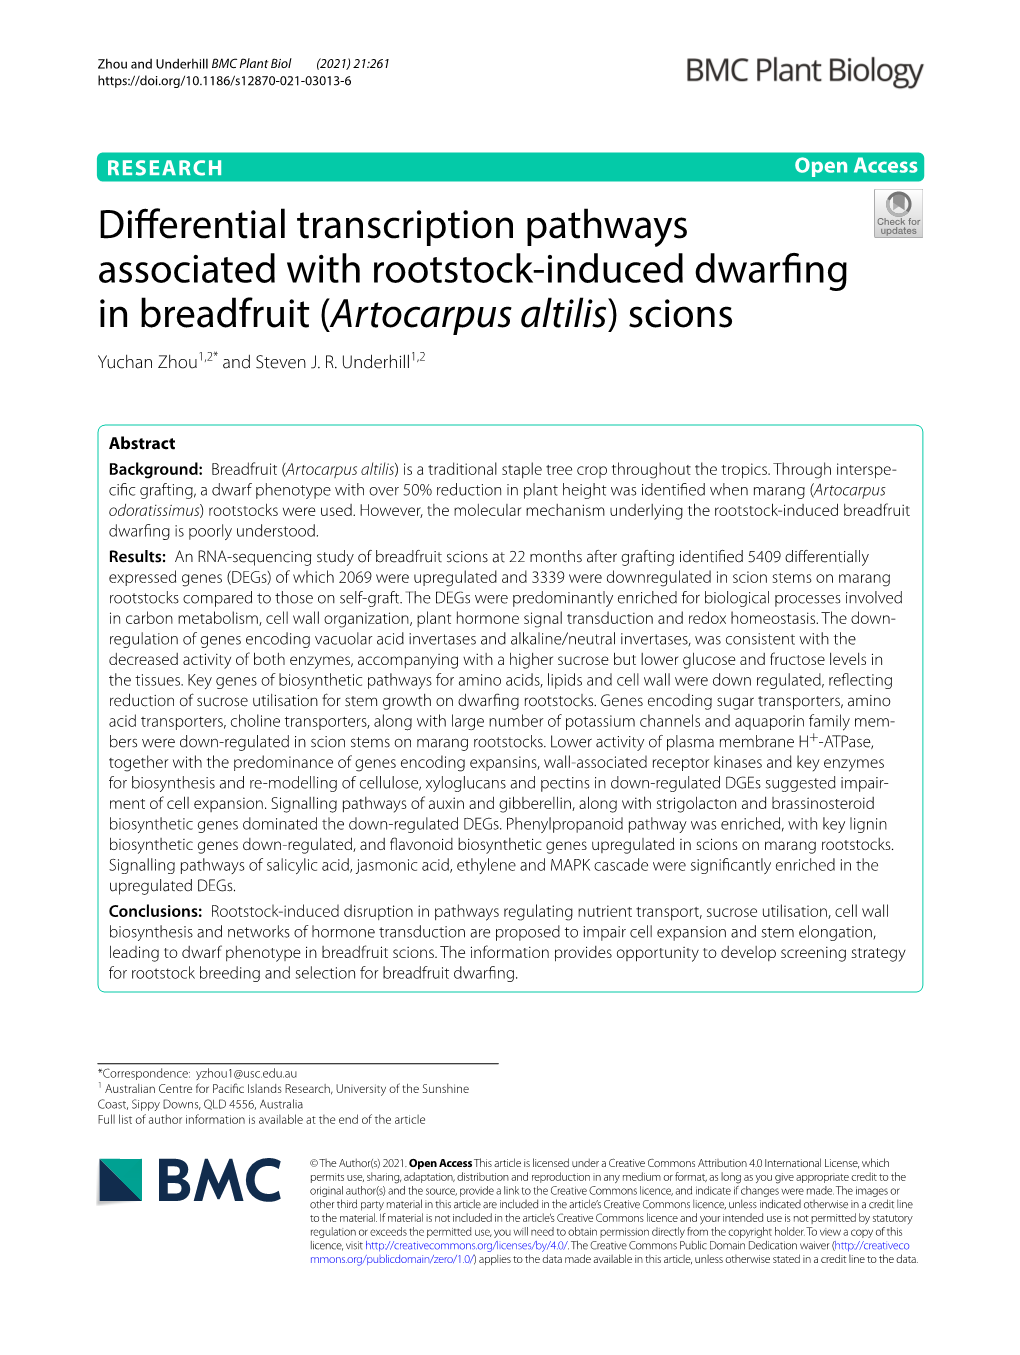 Differential Transcription Pathways Associated